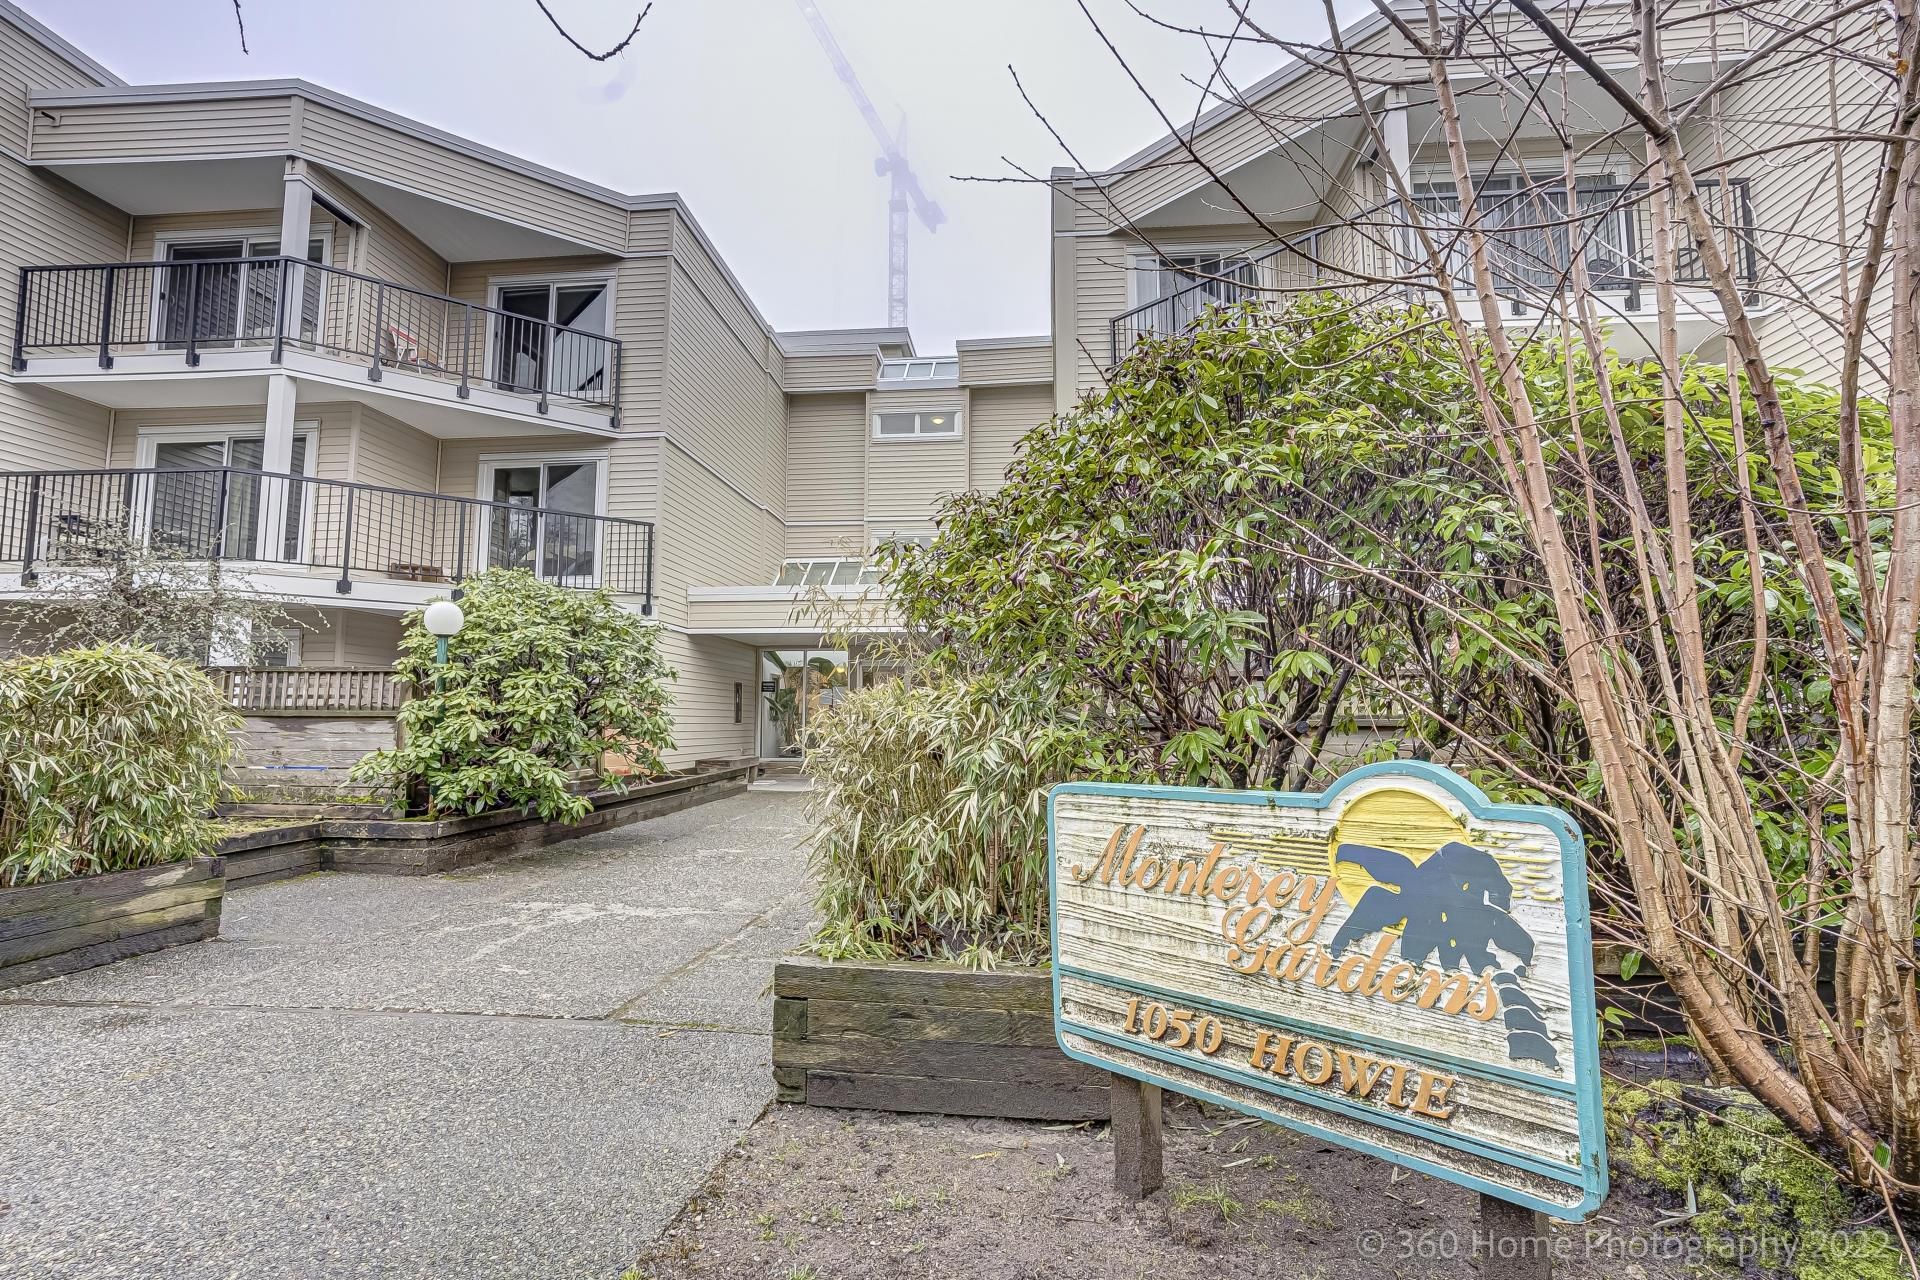 Main Photo: 106 1050 HOWIE AVENUE in : Central Coquitlam Condo for sale : MLS®# R2651967